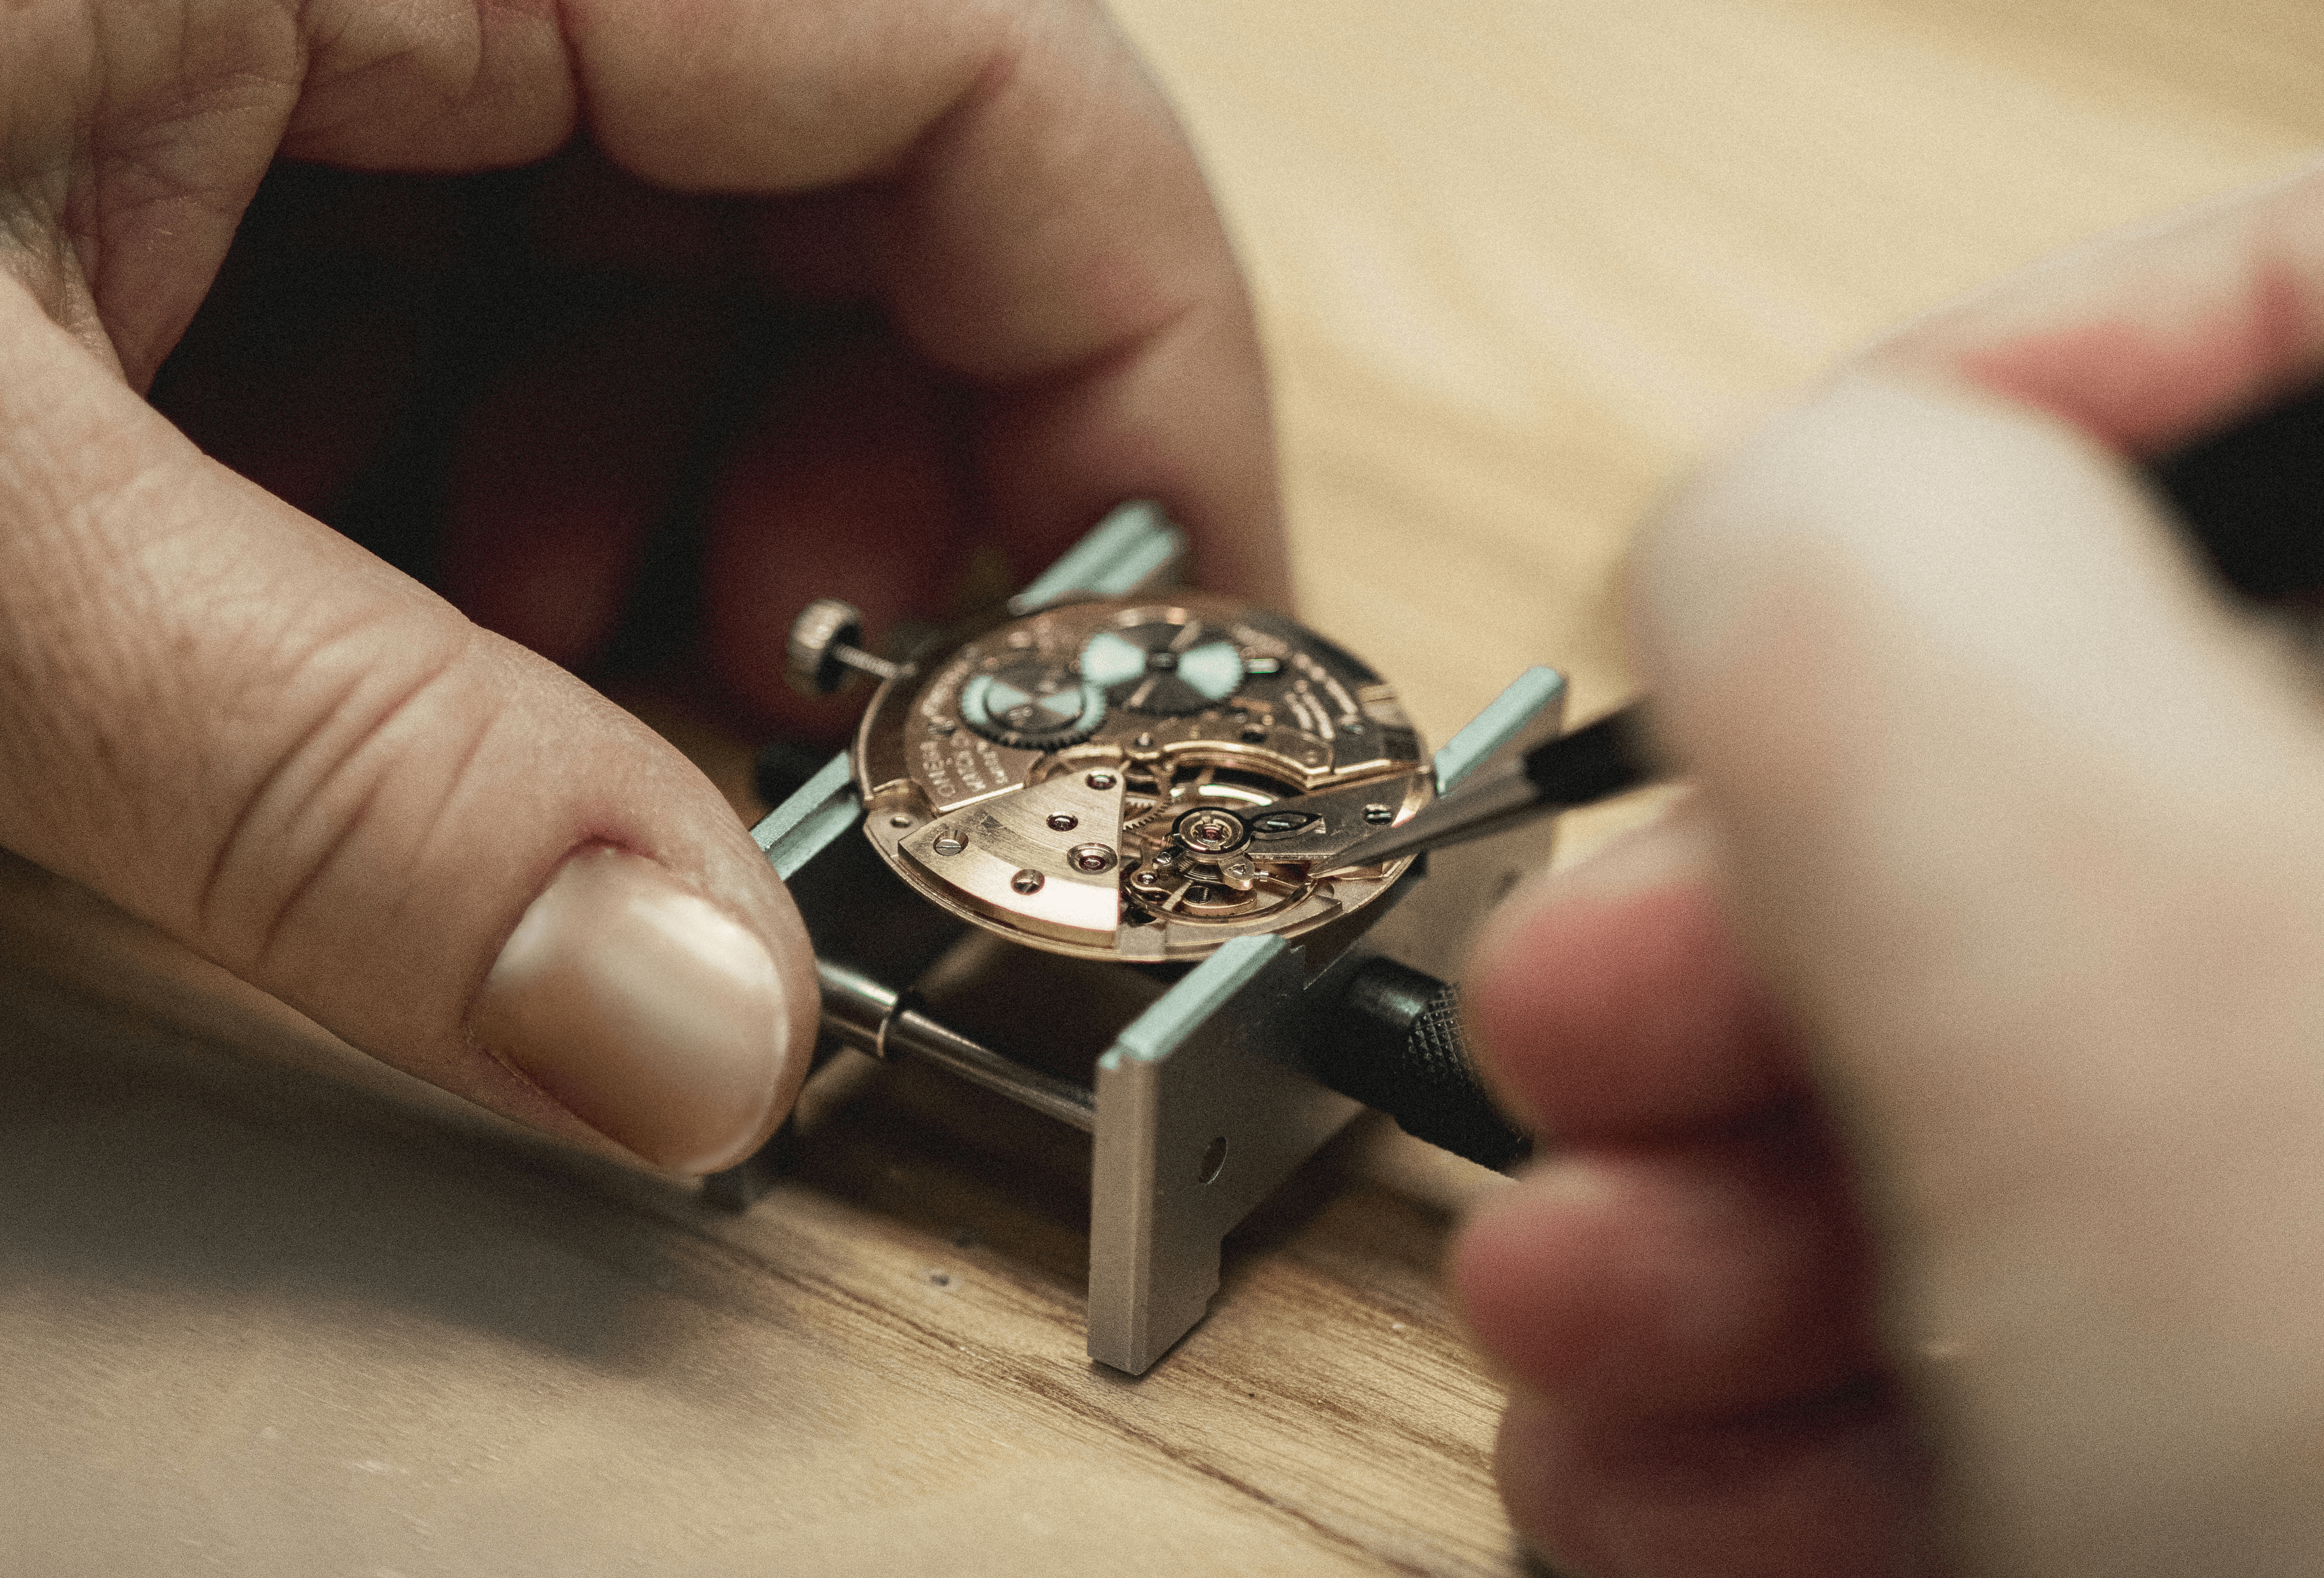 The Anatomy of a Watch